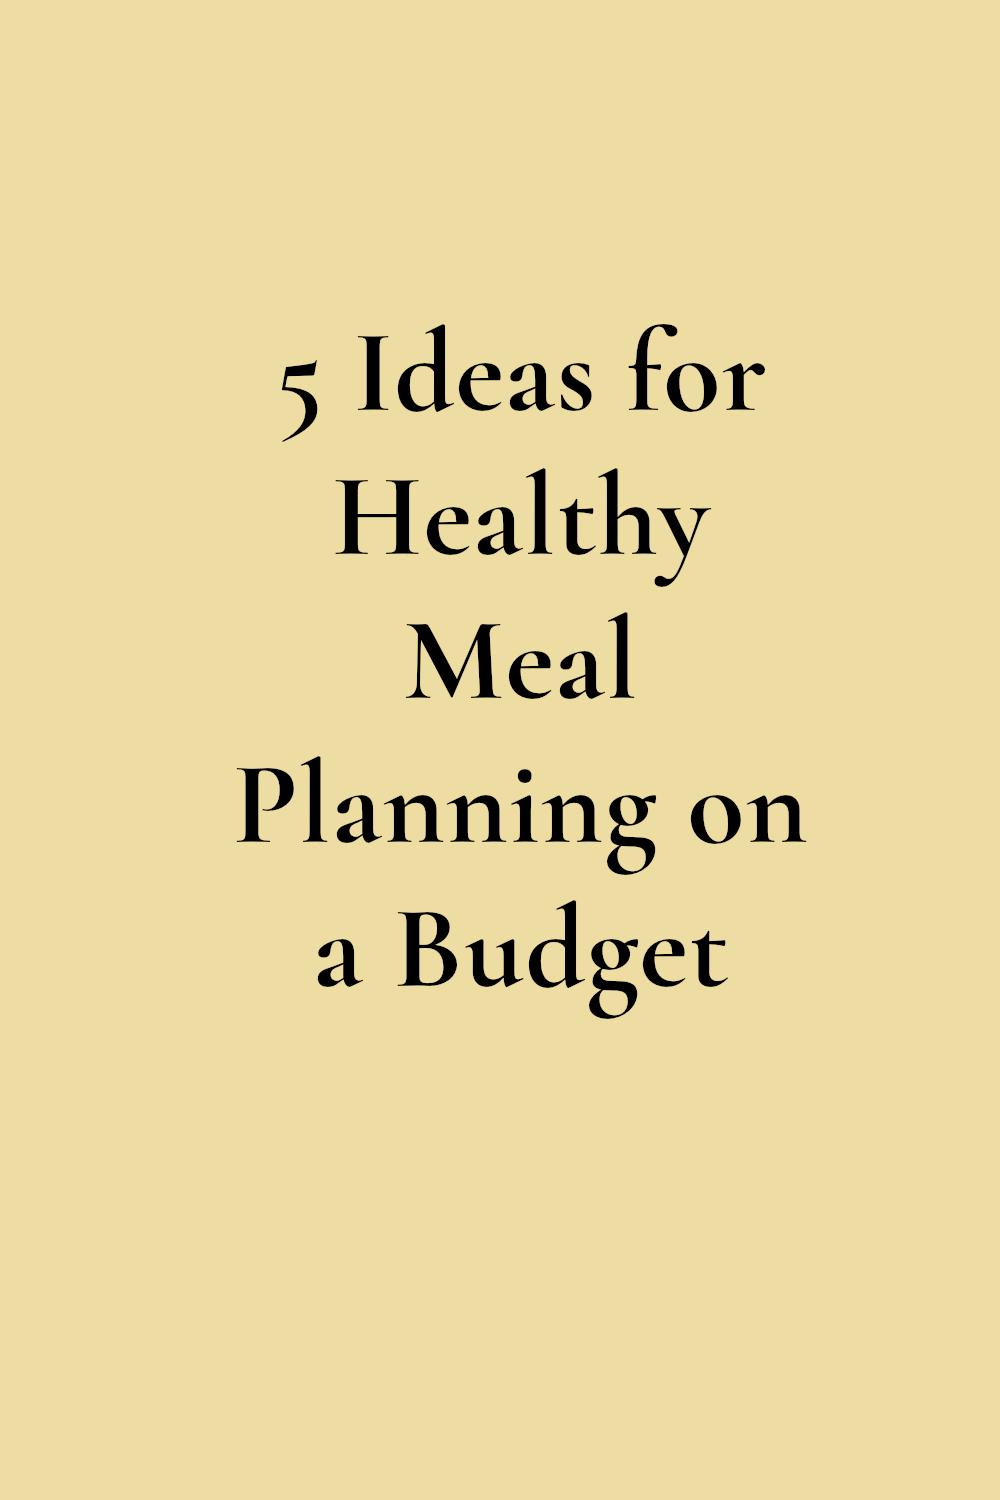 Healthy Meal Planning on a Budget